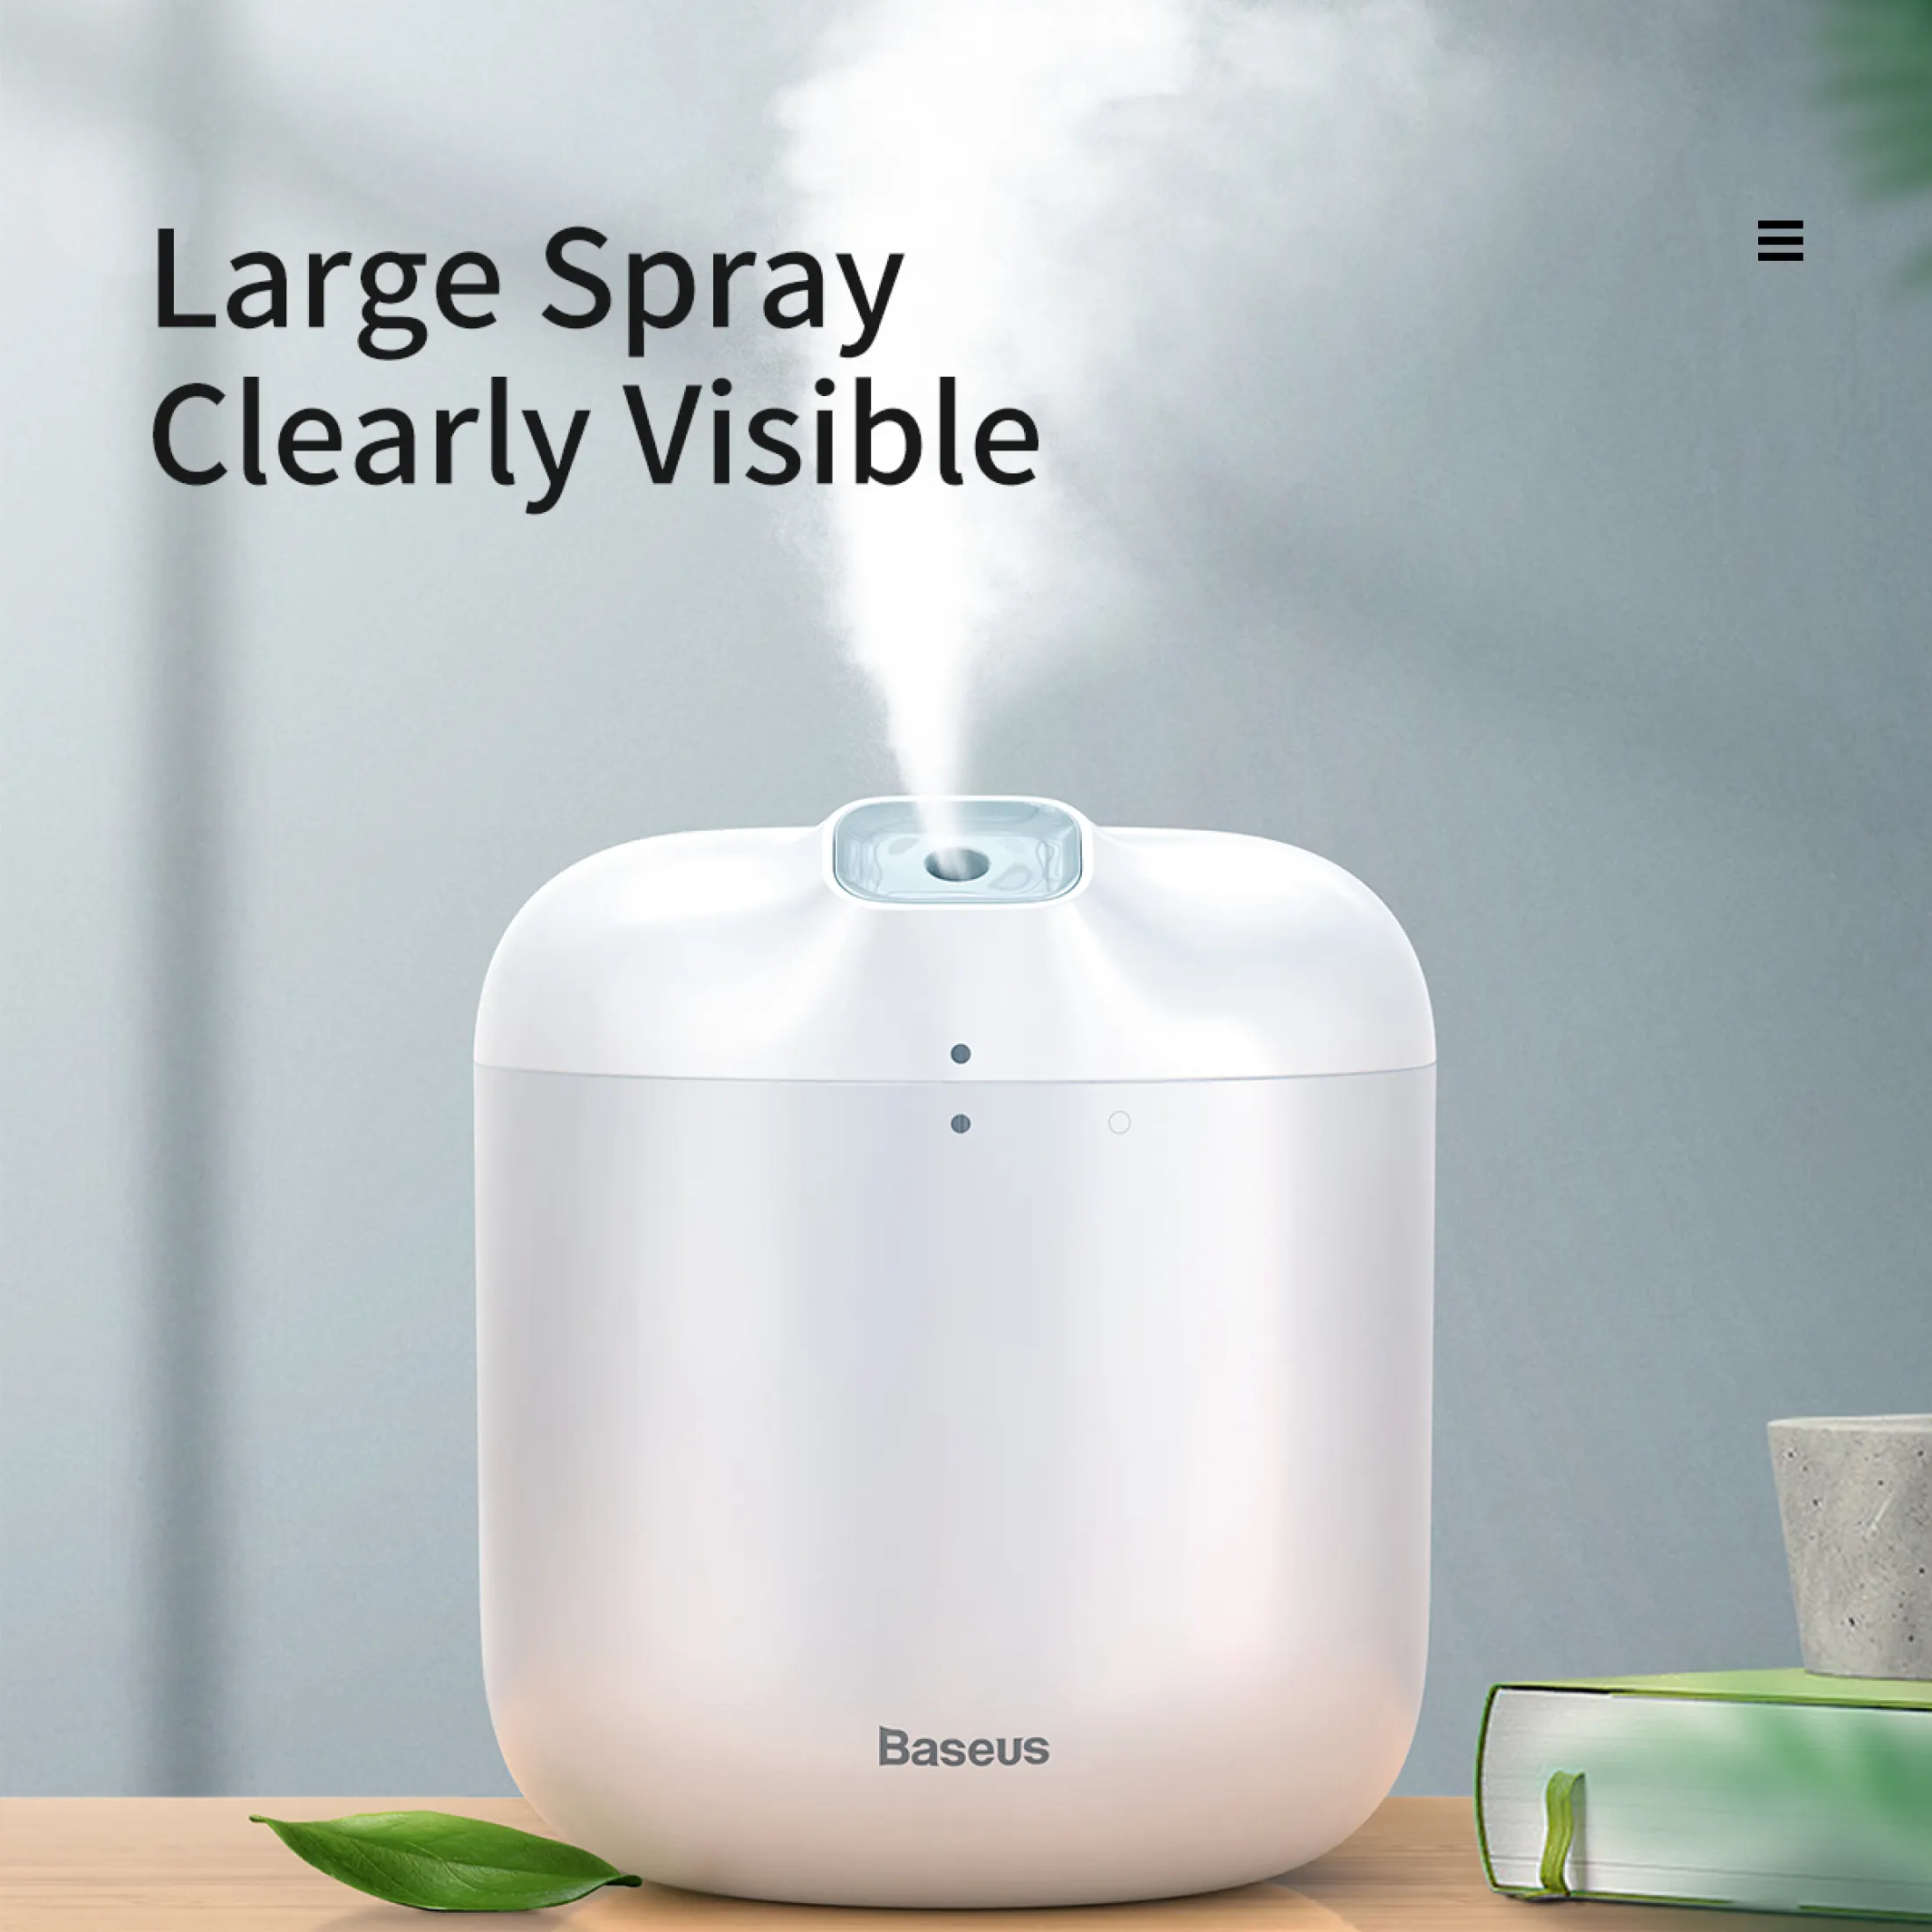 Baseus Elephant 2in1 Humidifier Air Purifier + LED Lamp buy online best price in pakistan